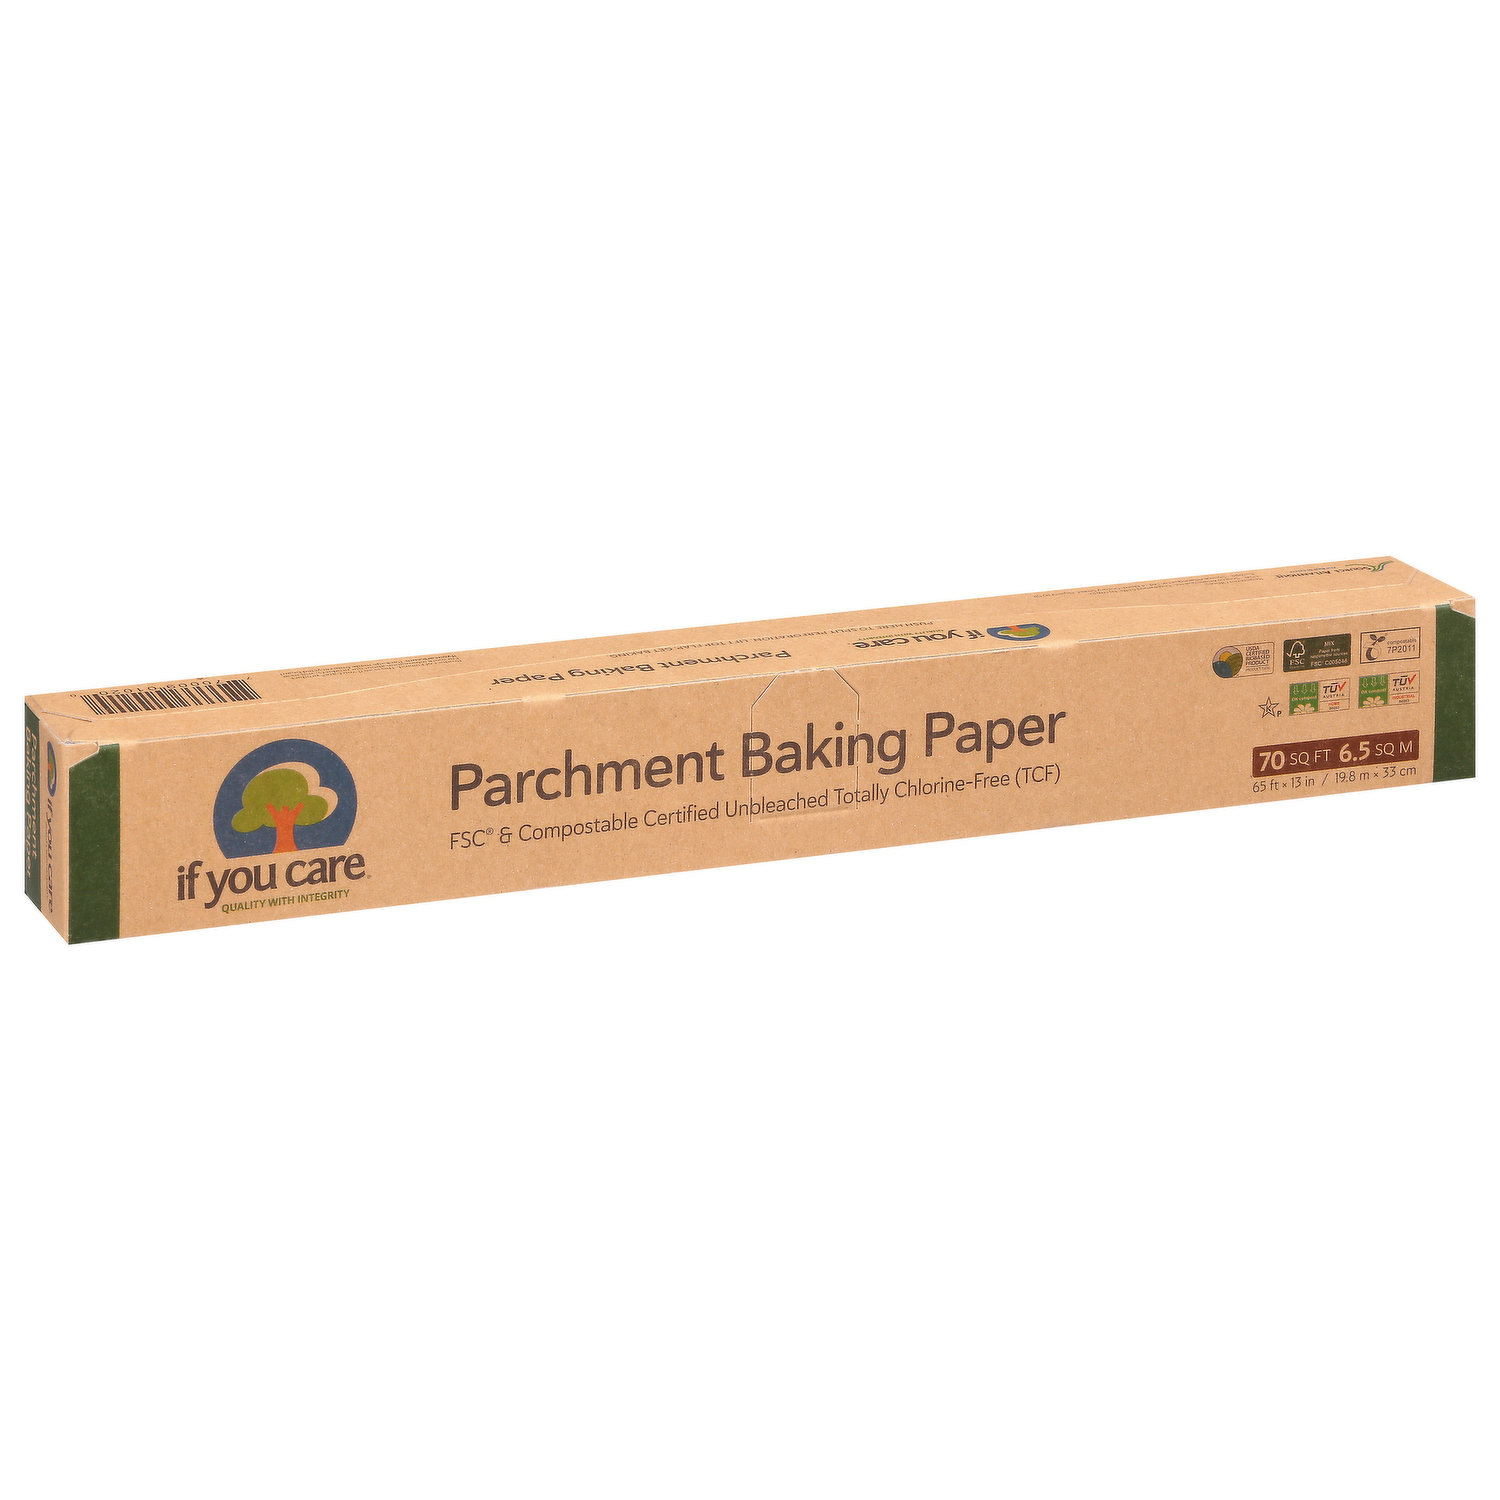 Reynolds Kitchens Stay Flat Parchment Paper with SmartGrid, 50 Square Feet  